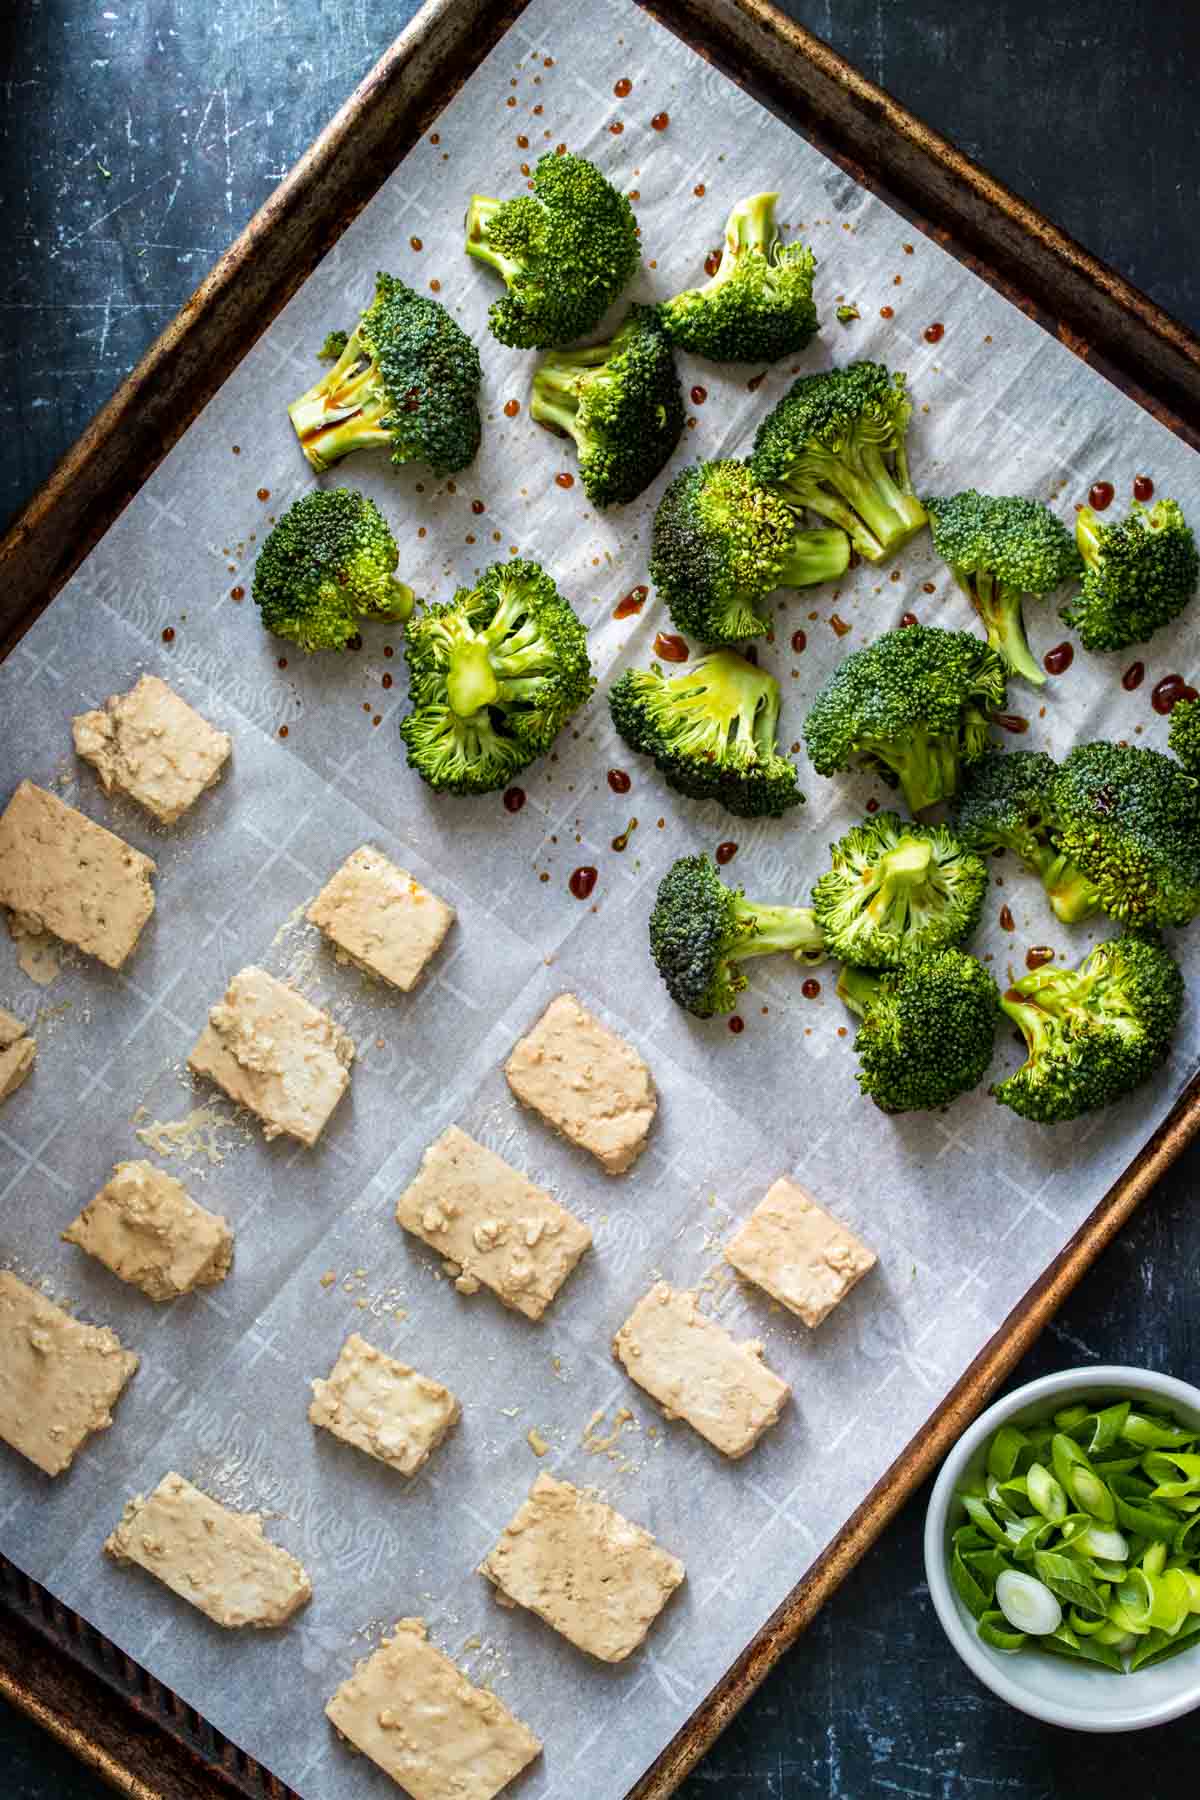 A baking sheet with parchment paper topped with tofu and pieces of broccoli